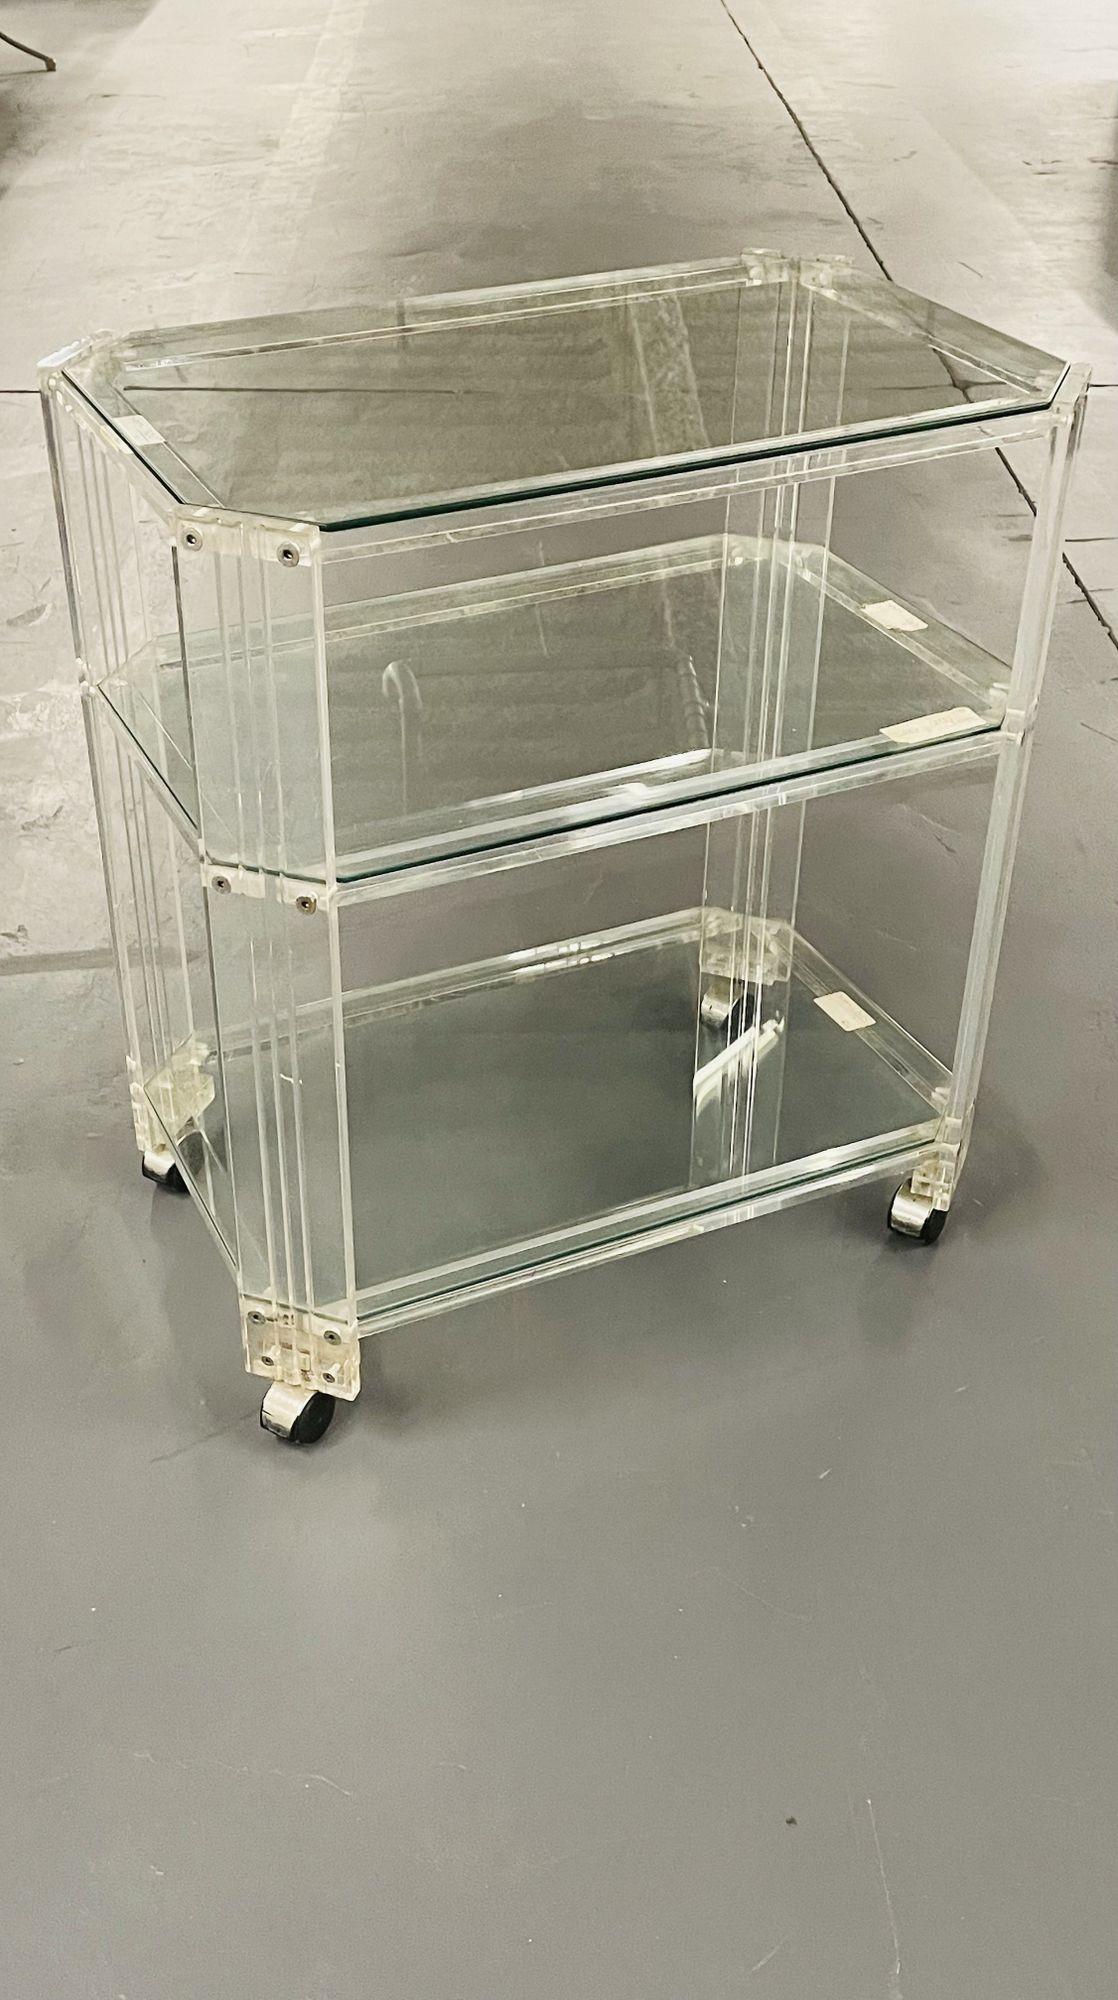 Mid-Century Modern three tier rolling bar, cart or server, lucite.
 
A finely constructed sleek and stylish mid century modern dry bar, serving cart, or server. The chrome circular wheels make moving this cart effortless. The reeded sides having